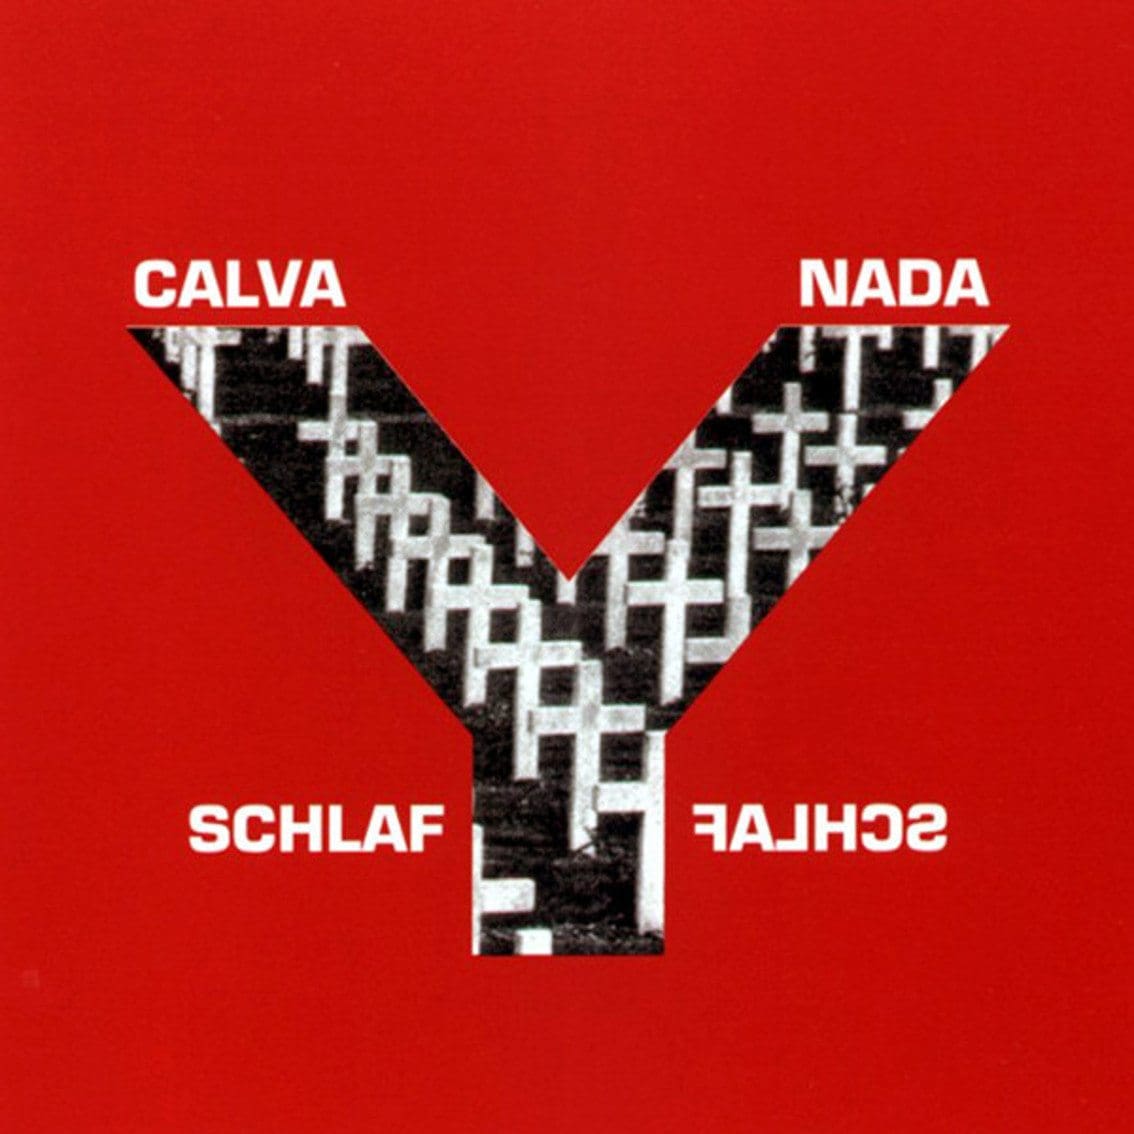 Calva Y Nada re-release of 'Schlaf' imminent - also available as a VERY limited 2CD set